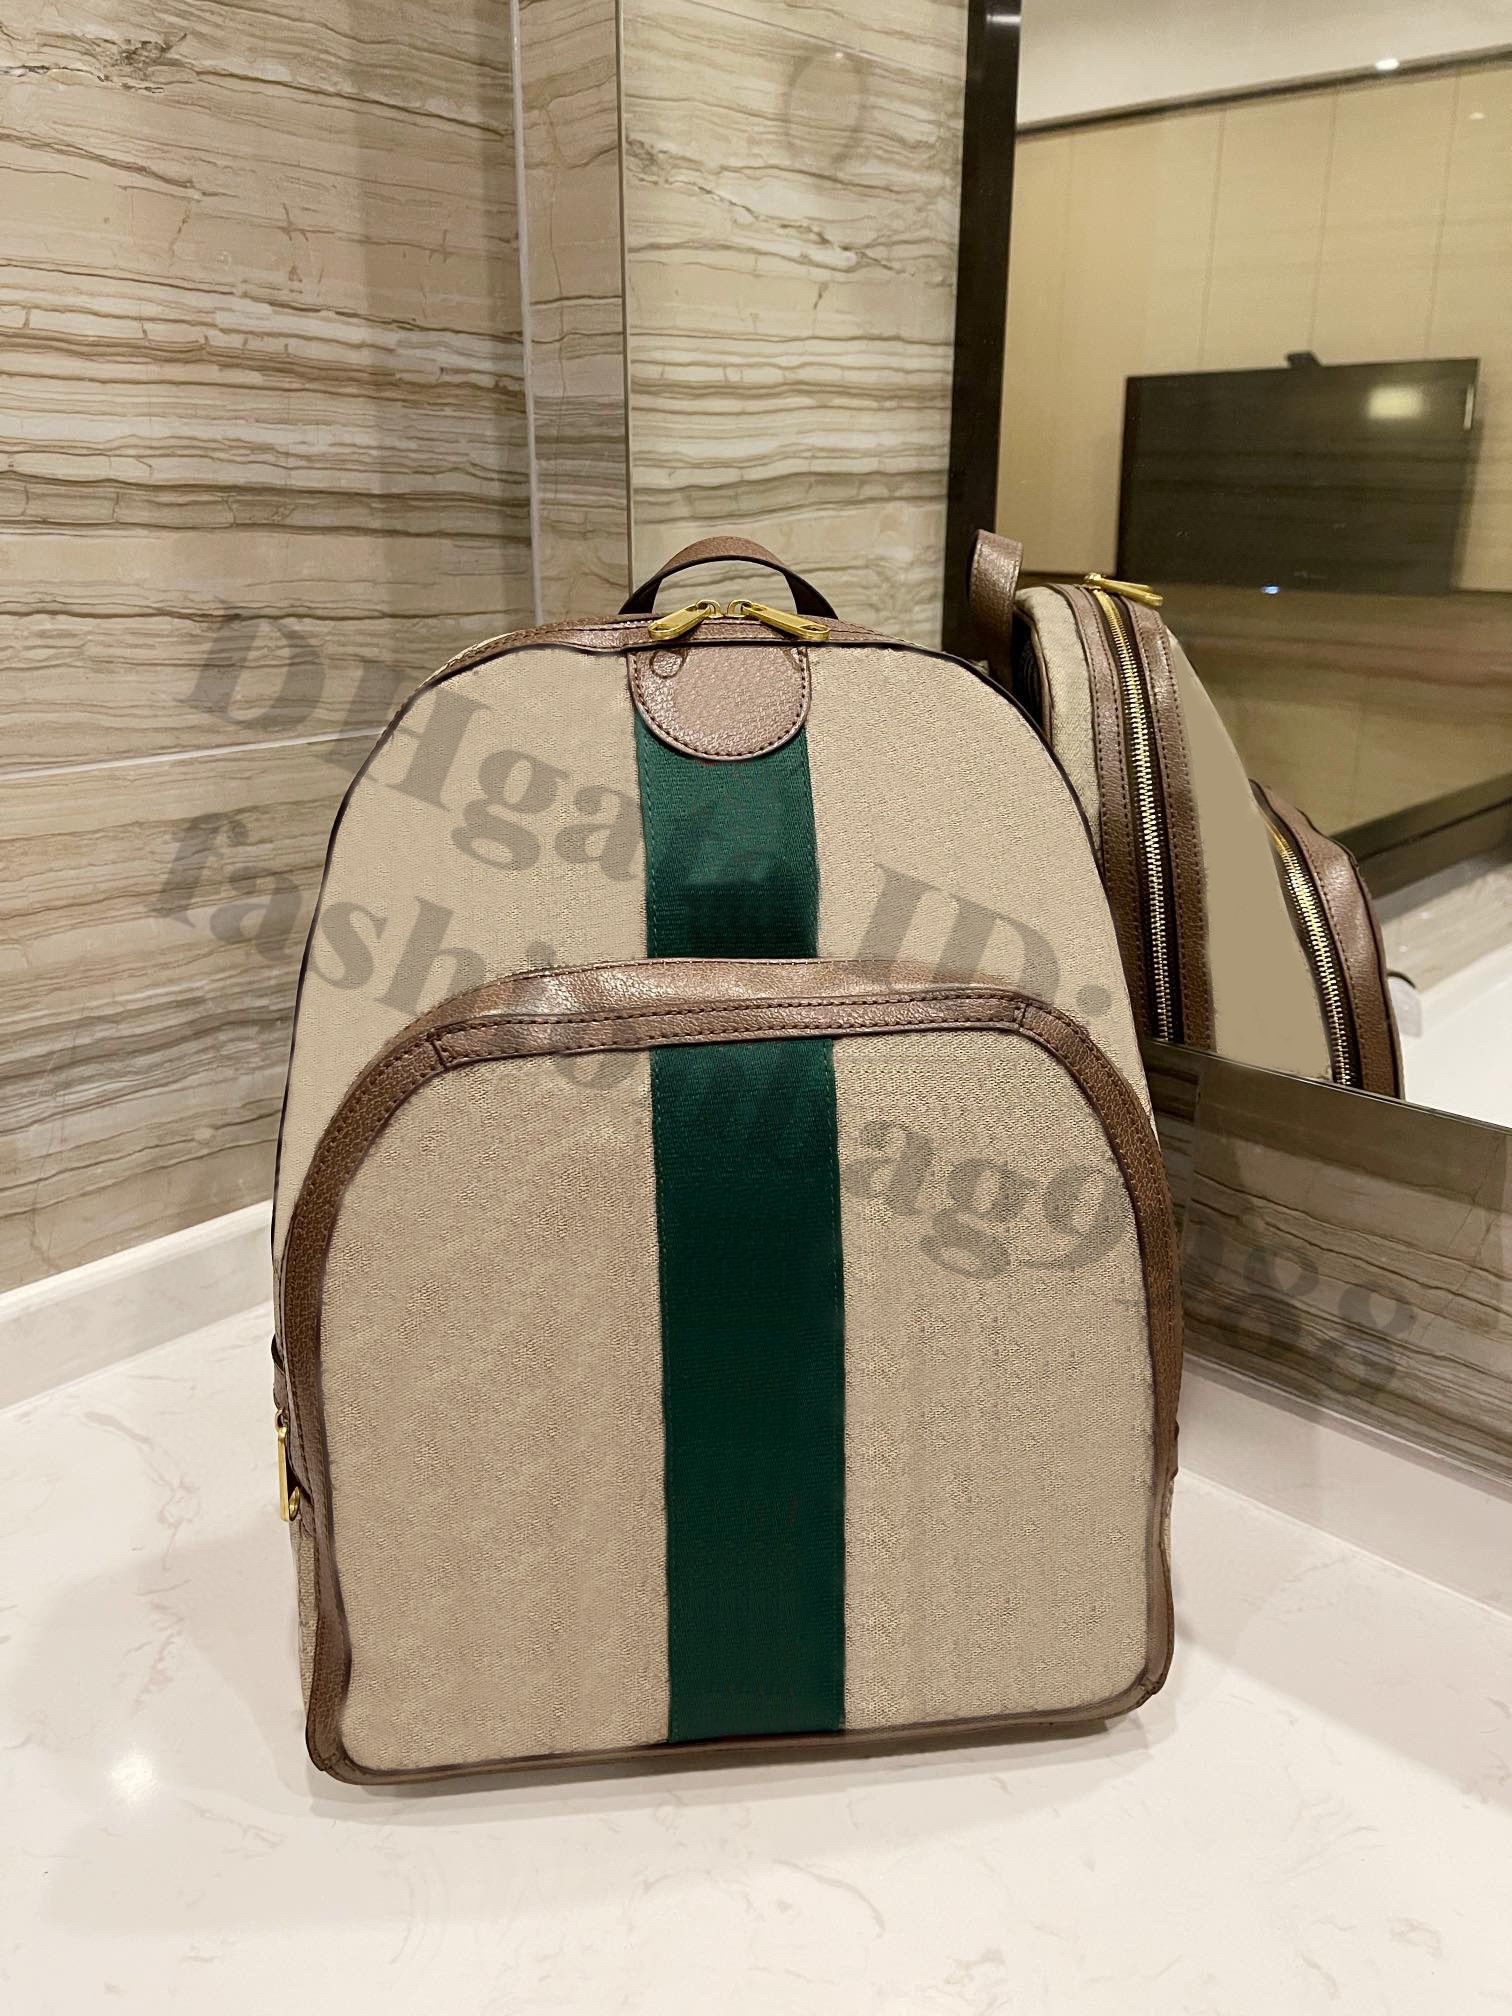 Unisex Daily Life Brand Big Backpack For Men Spring Lady Fashion Design Real  Leather Large Capacity Hand Cross Body Bags Travel M Women Luxury Ladies  Bag Full Letters From Fashionbag9988, $69.64